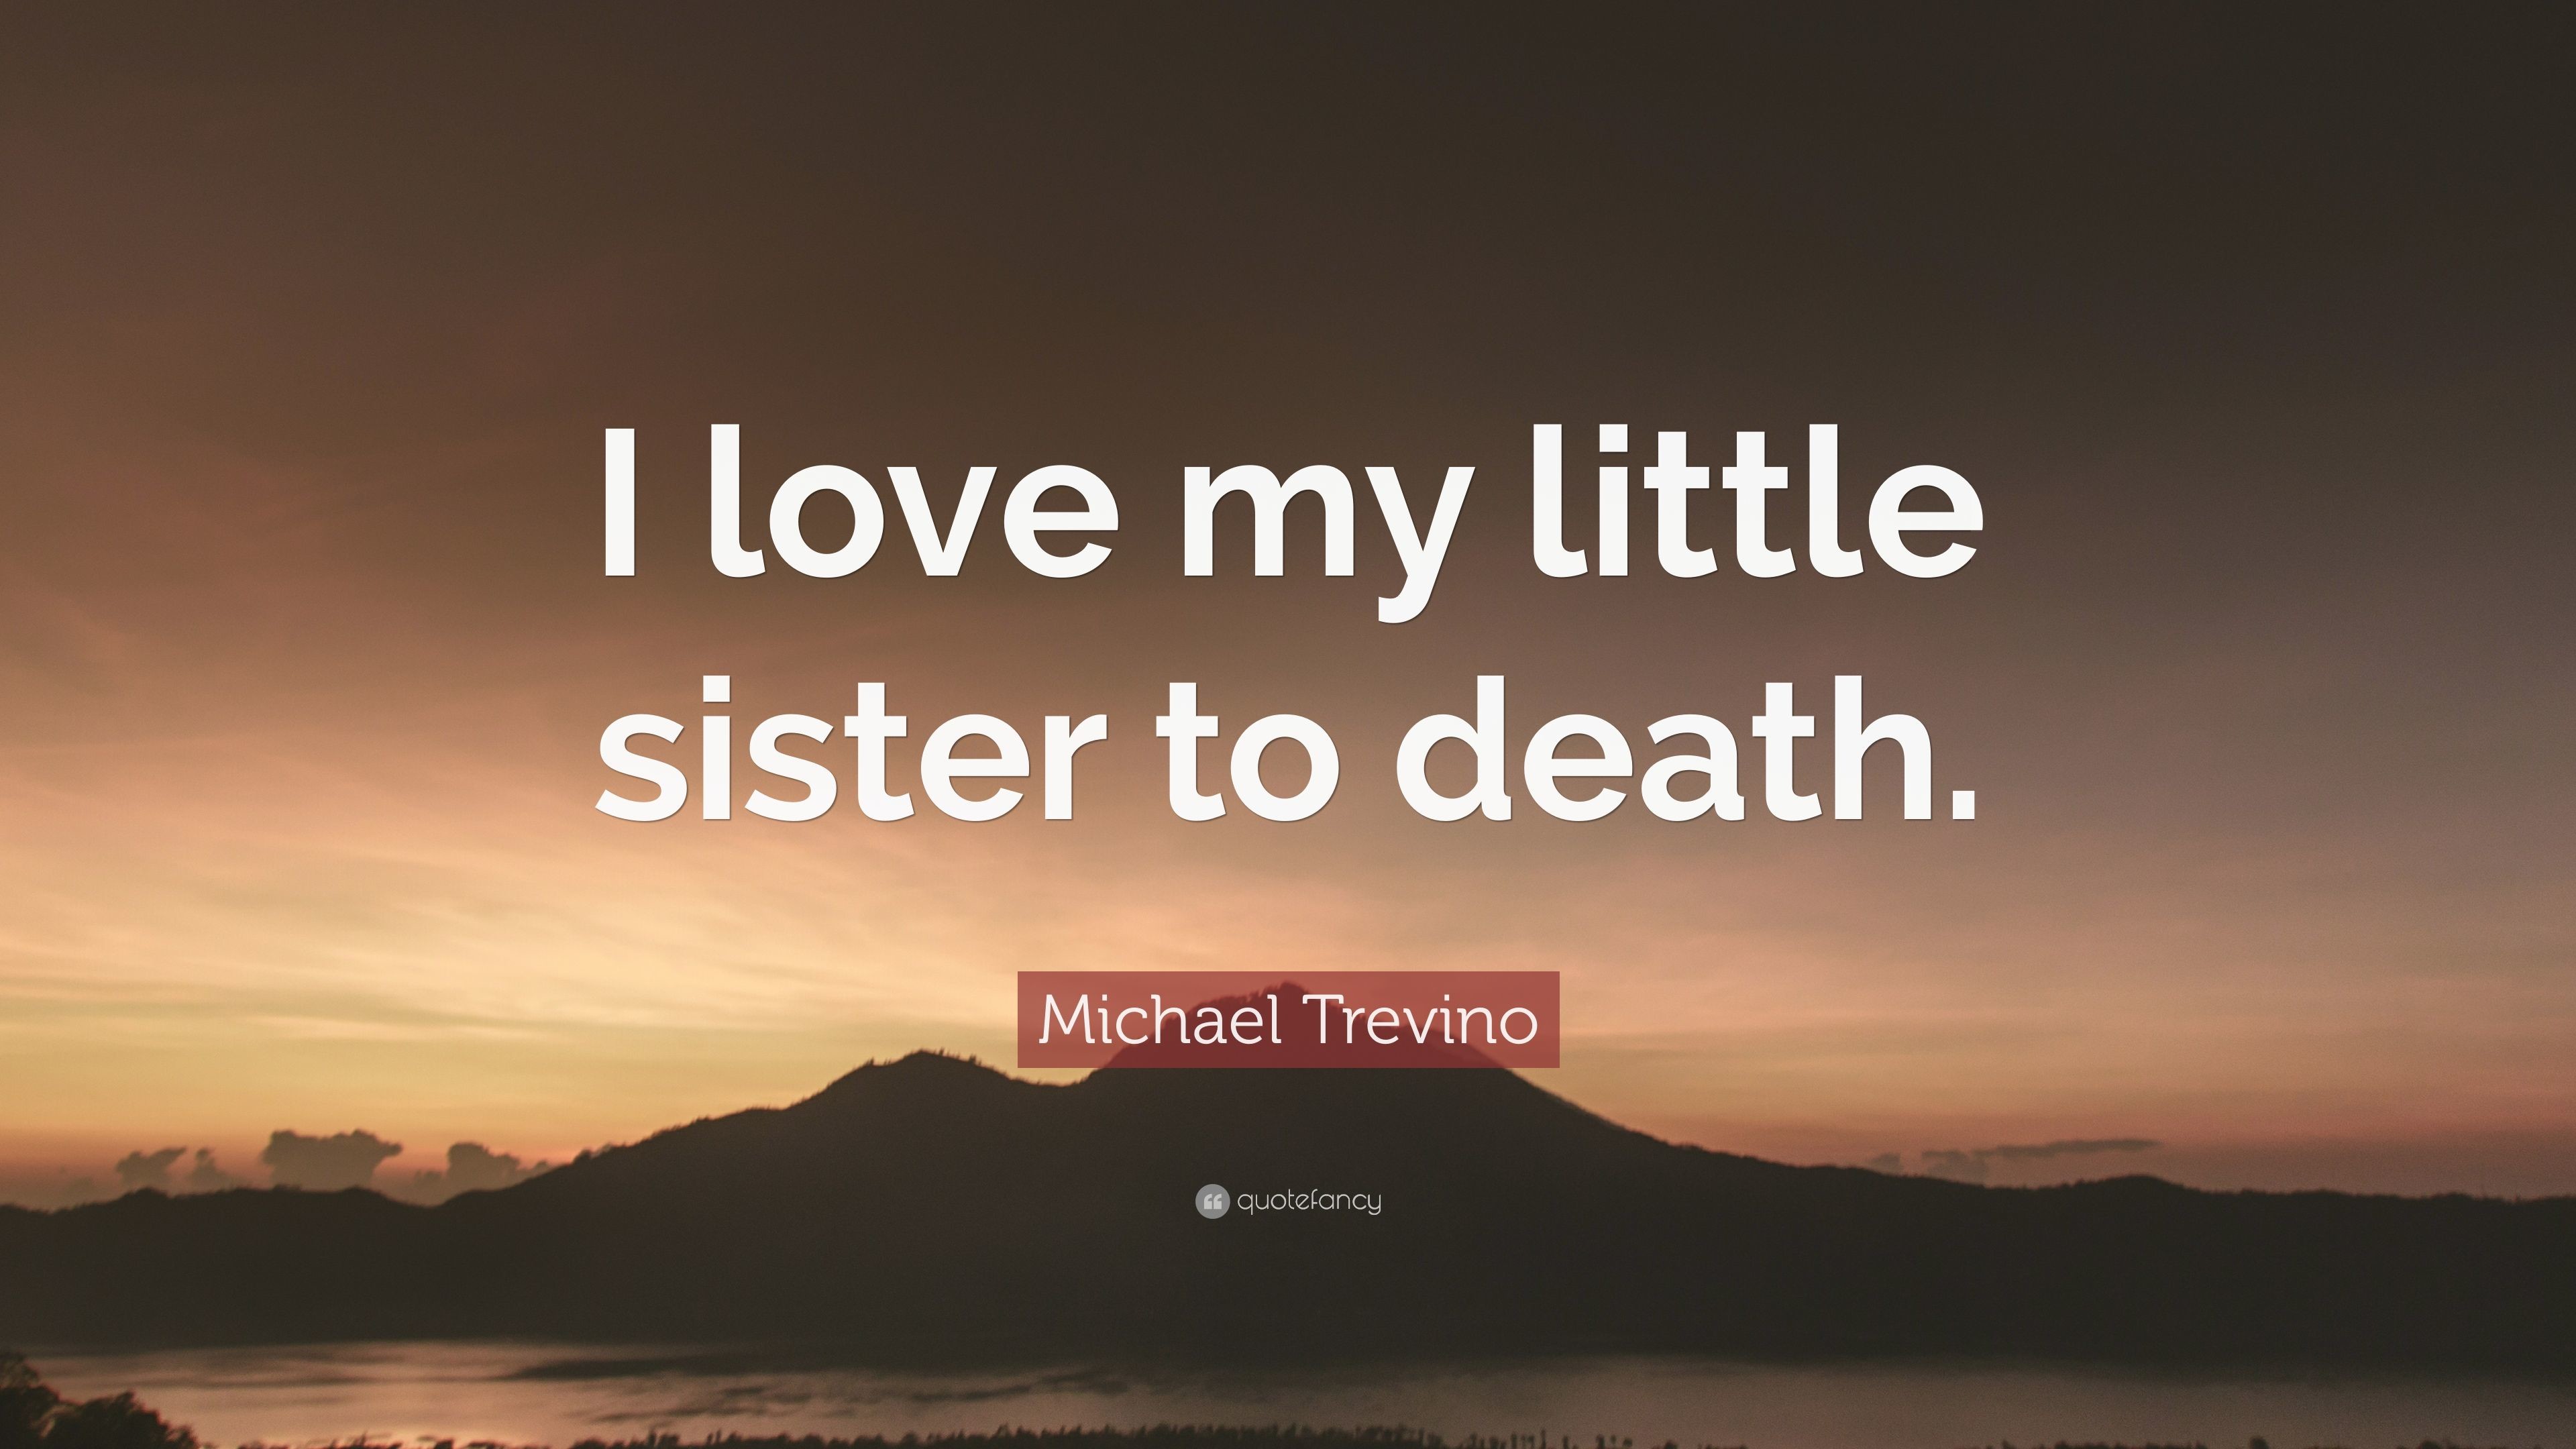 Michael Trevino Quote I love my little sister to death.